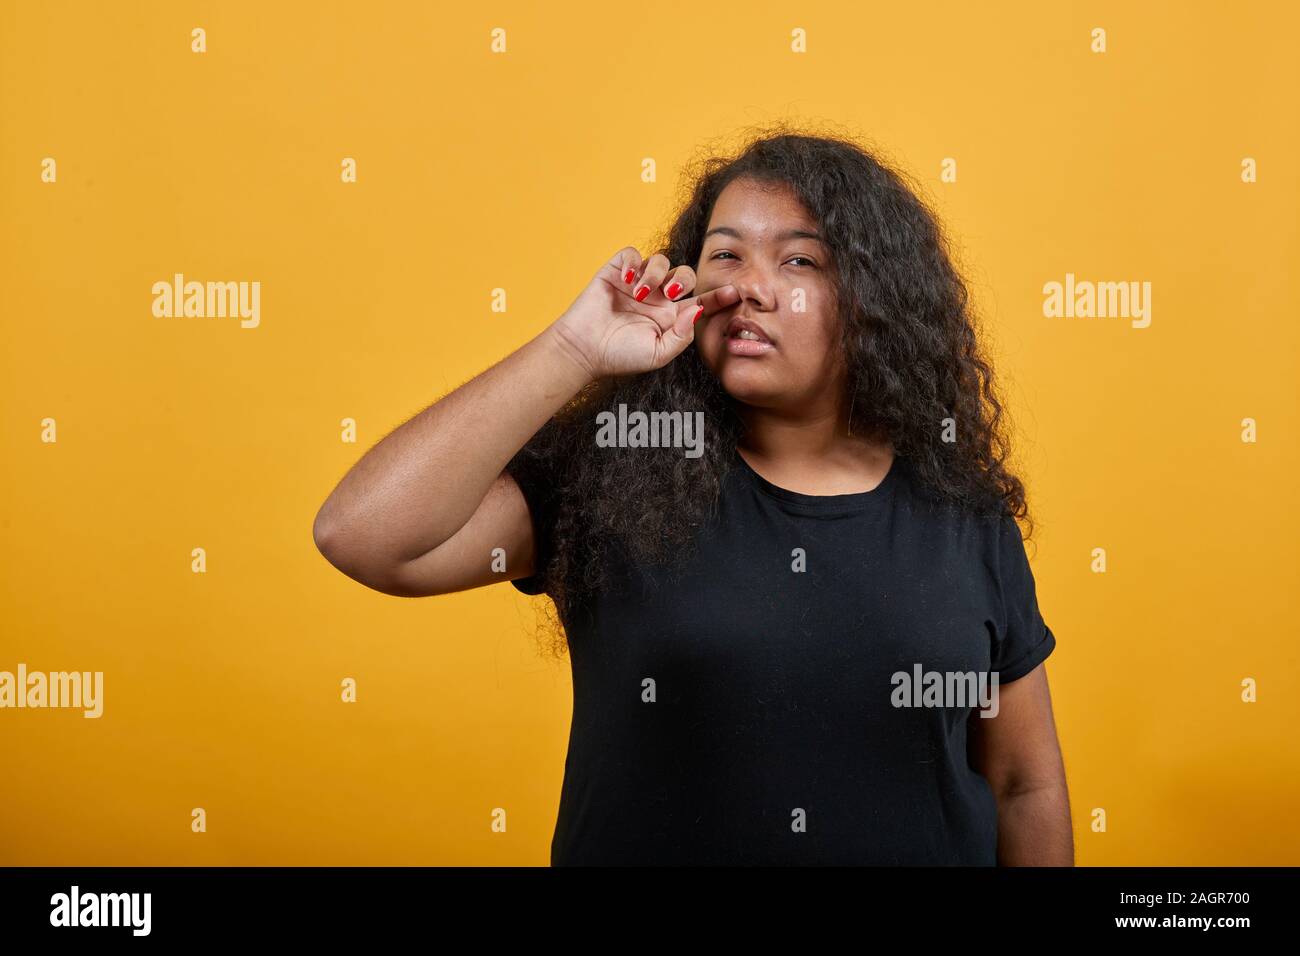 Afro-american young woman with overweight picking nose, looking at camera Stock Photo